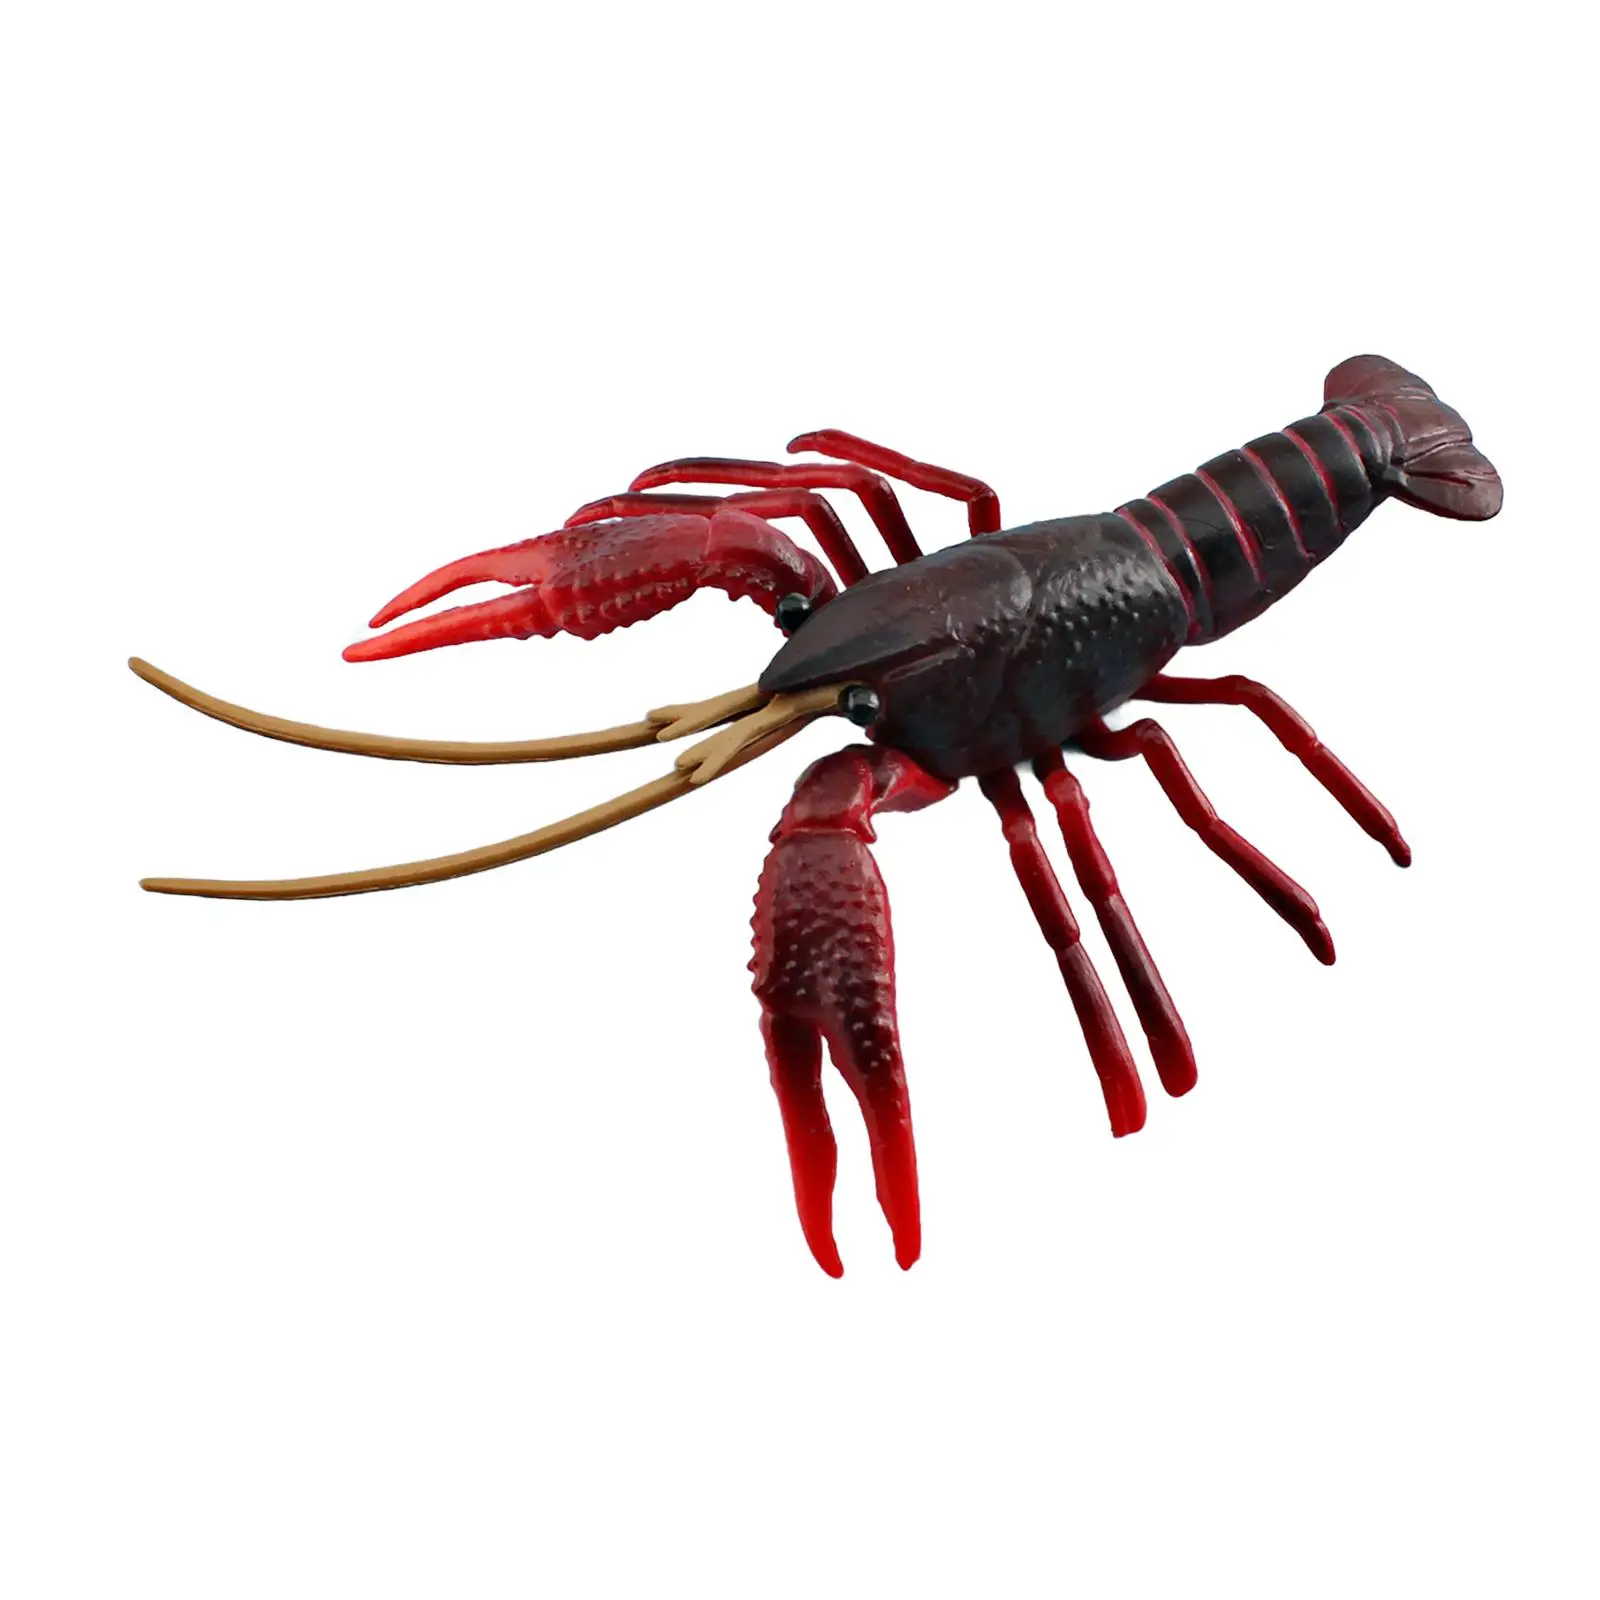 

Lobster Action Figure Marine Animals Aquarium Sea Life Realistic Sea Model for Kids Toddlers Boys Girls Birthday Gifts